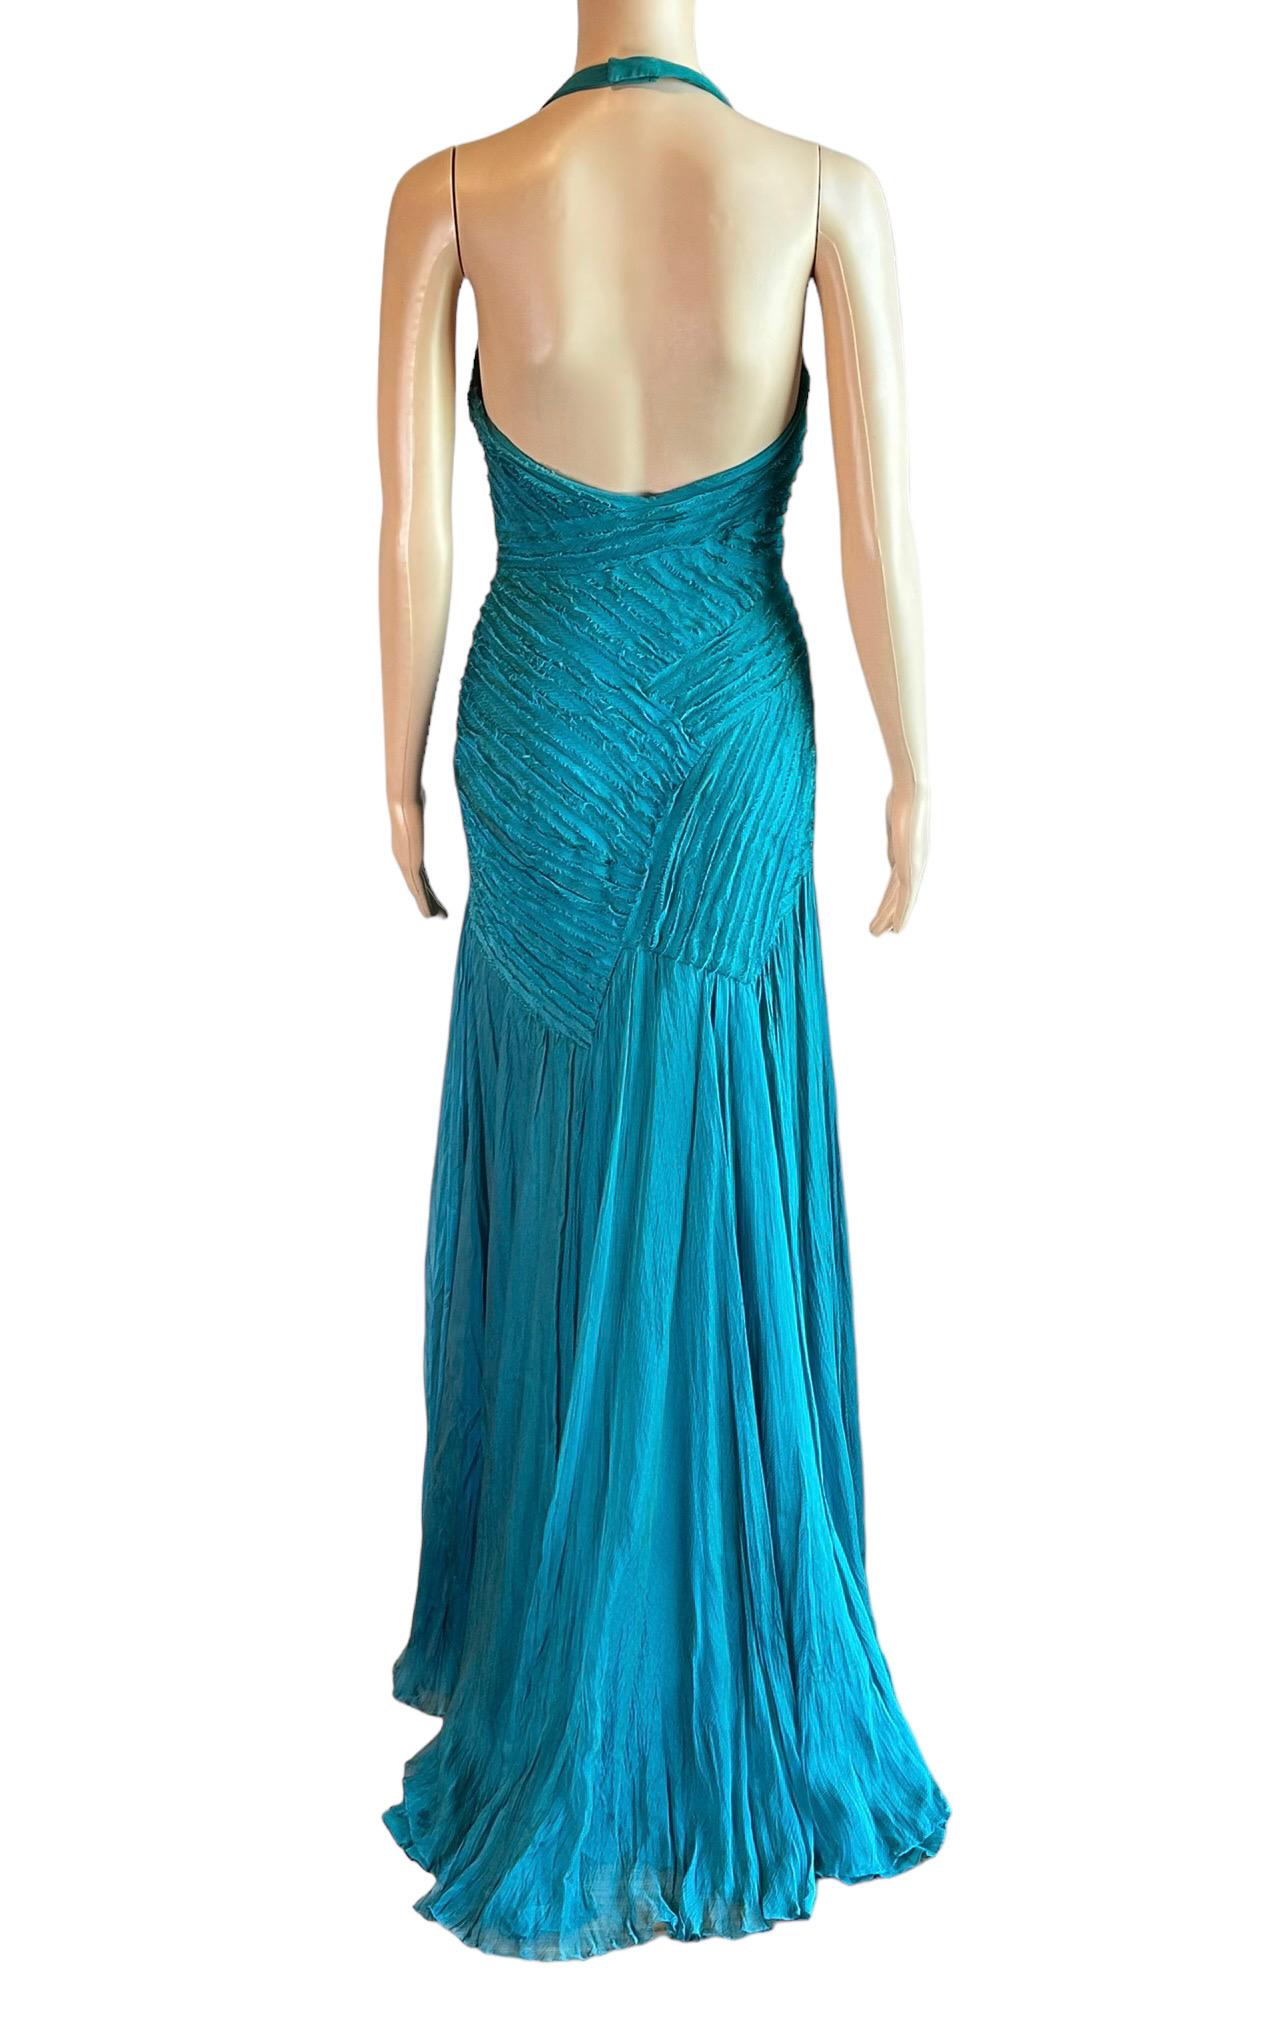 Versace F/W 2005 Runway Campaign Halter High Slit Slip Evening Dress Gown  For Sale 1